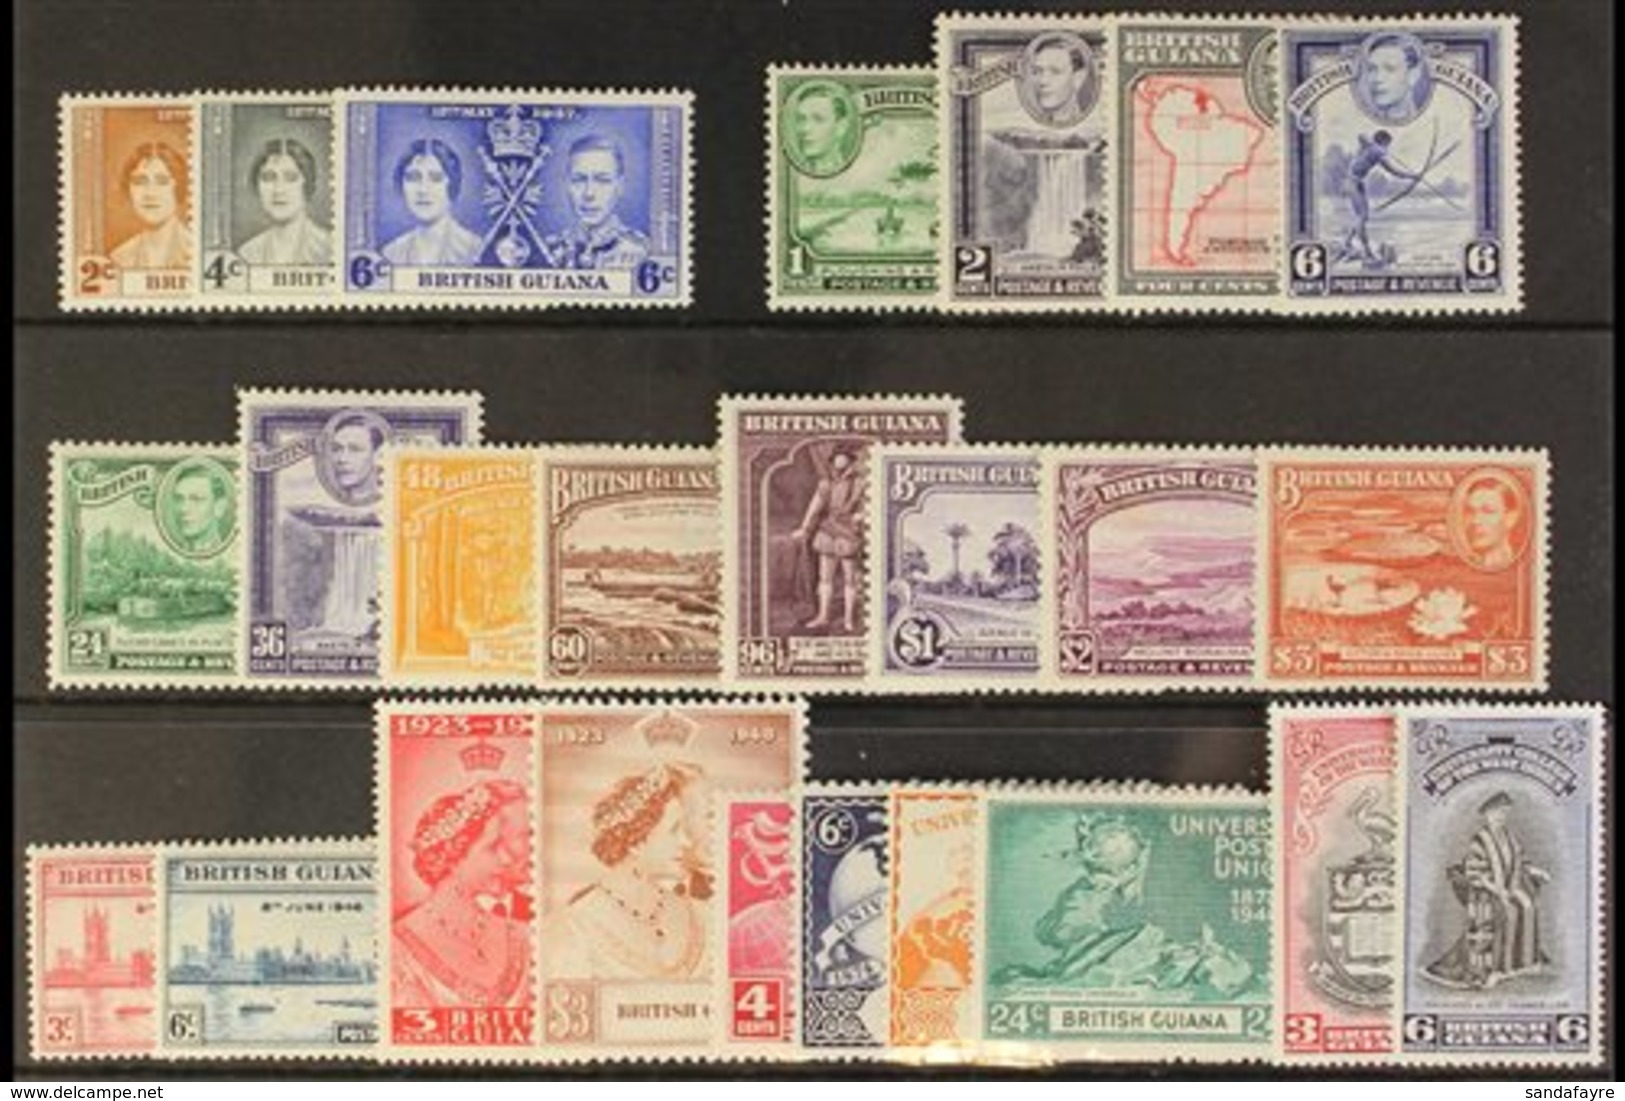 1937-52 KGVI COMPLETE MINT COLLECTION A Complete "Basic" Mint Collection Spanning Coronation To BWI Set, SG 305/29, Fine - Guayana Británica (...-1966)